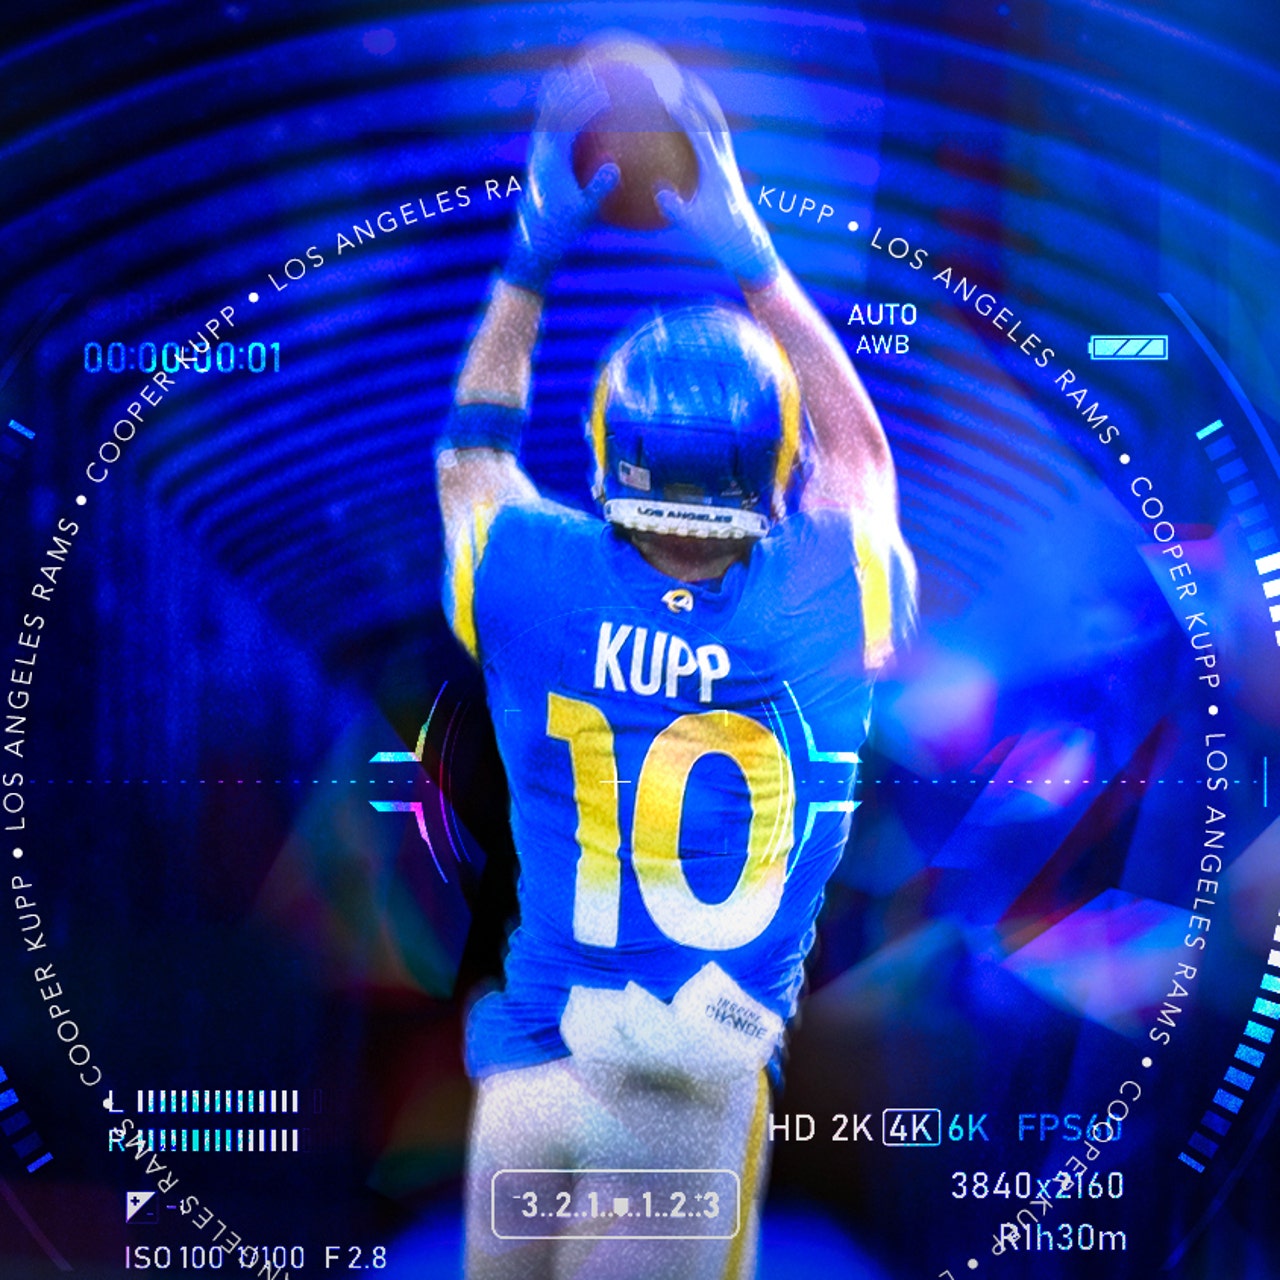 MVP Cooper Kupp declared as the MVP of Super Bowl as the Rams take down  the Bengals to win Super Bowl LVI